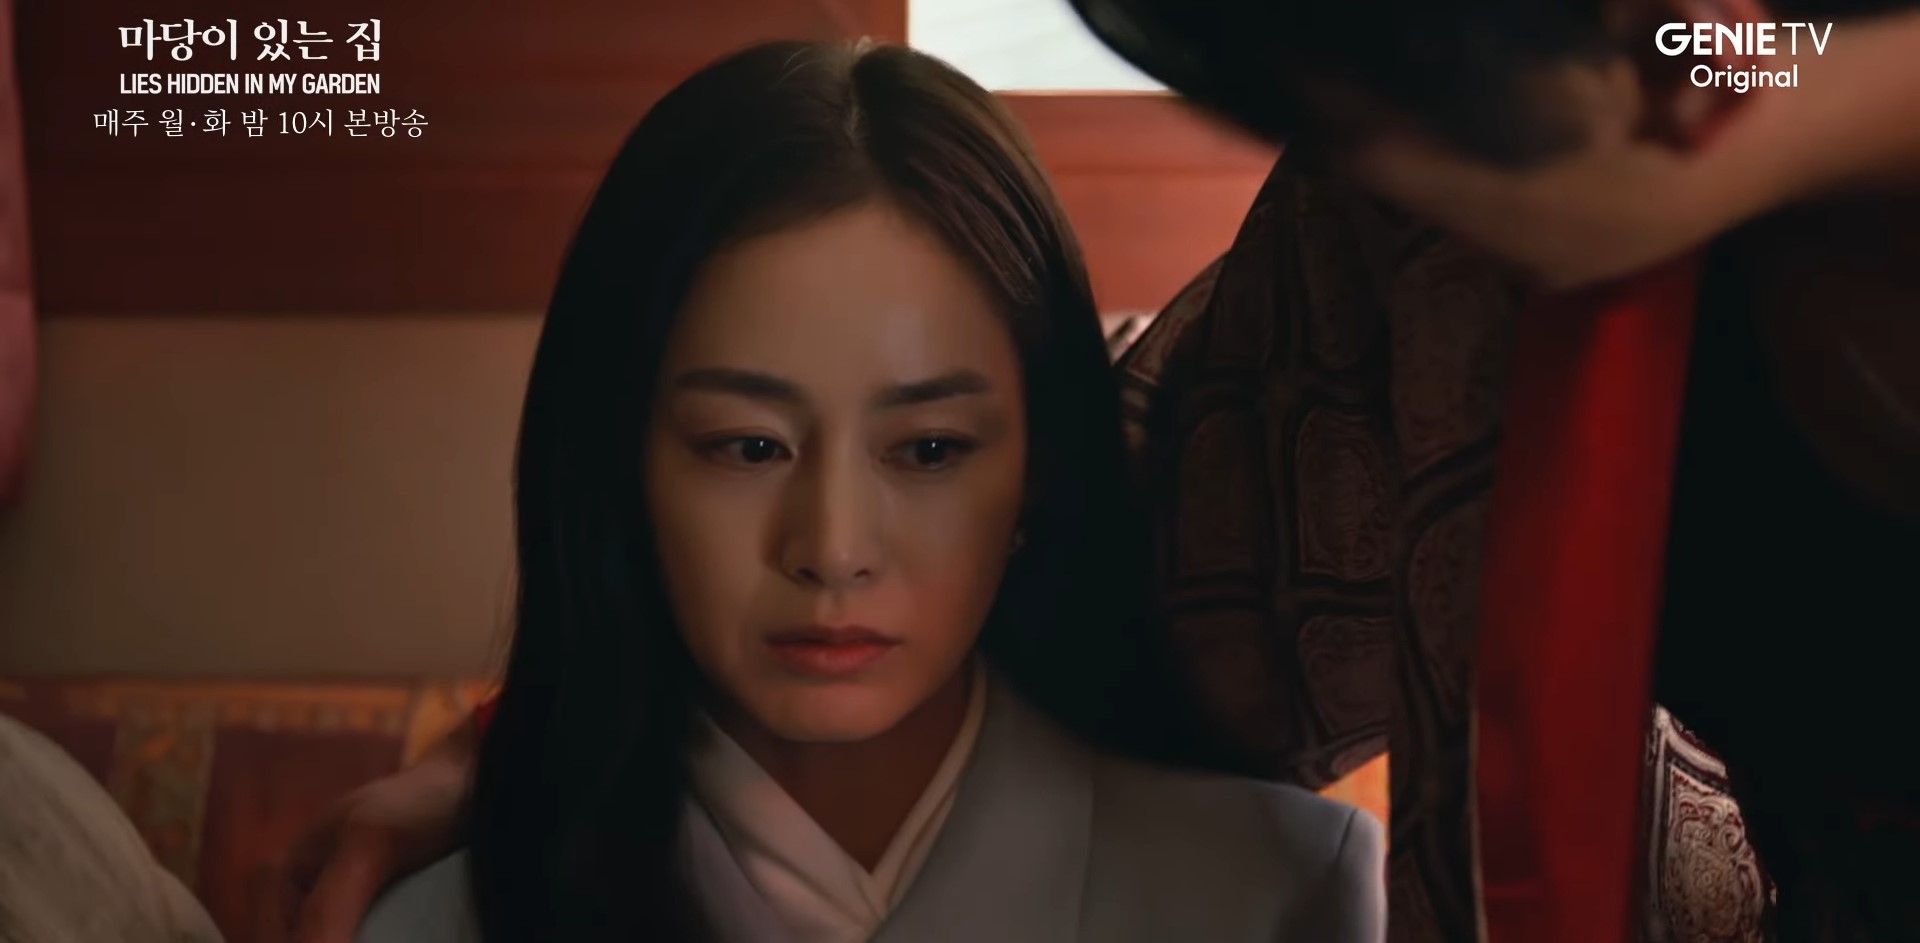 Lies Hidden in My Garden Episode 5 Preview: Joo-ran Finds Out the Truth